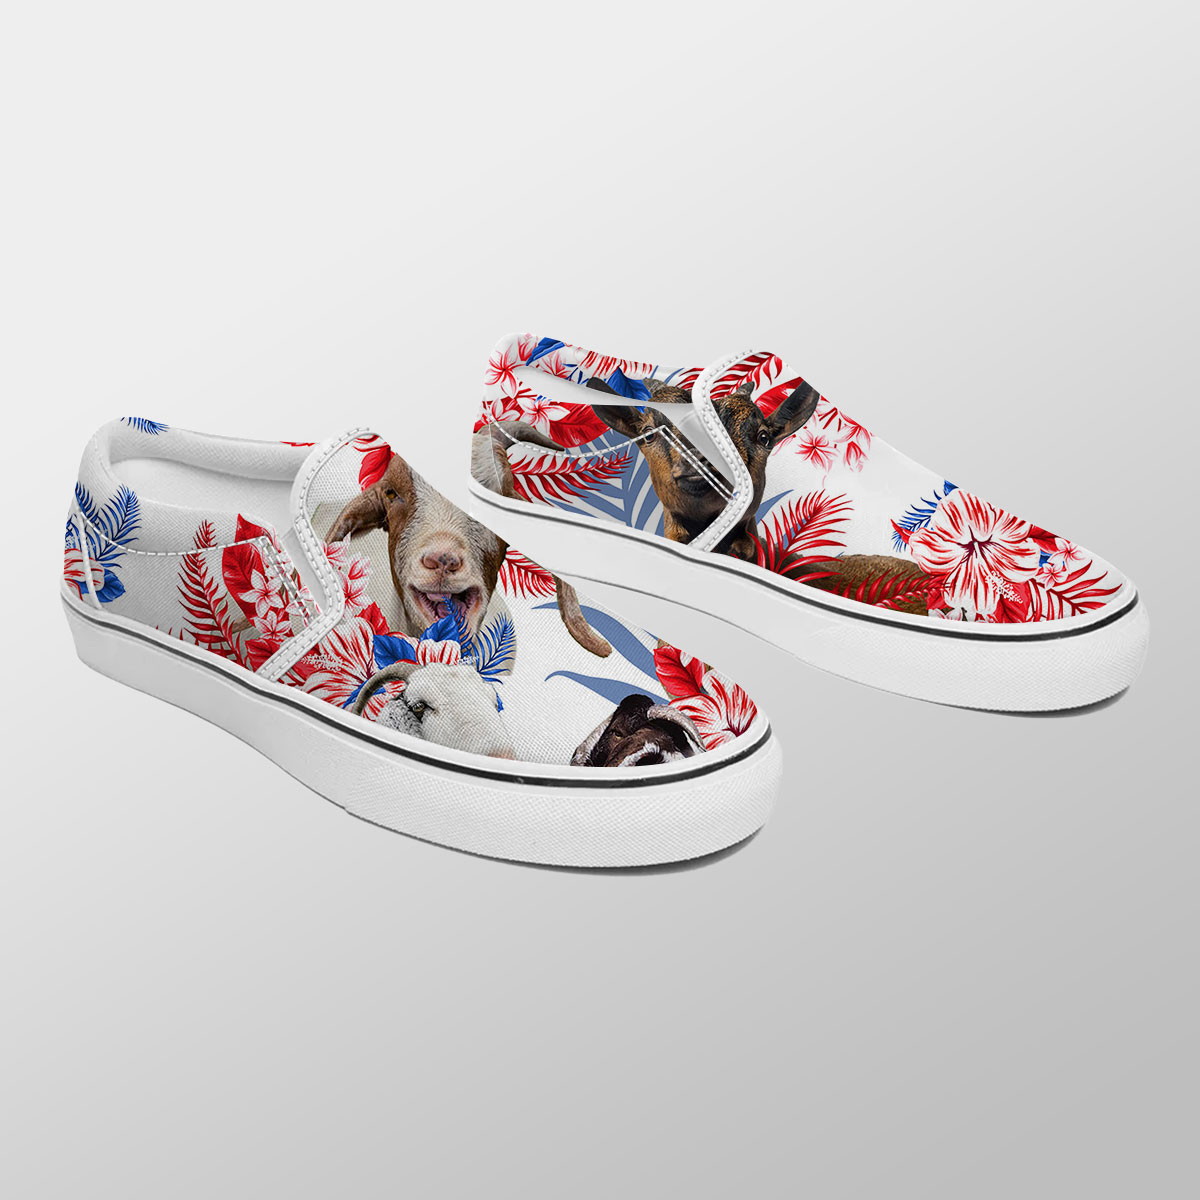 Goat Red Hibiscus Flower Slip On Sneakers